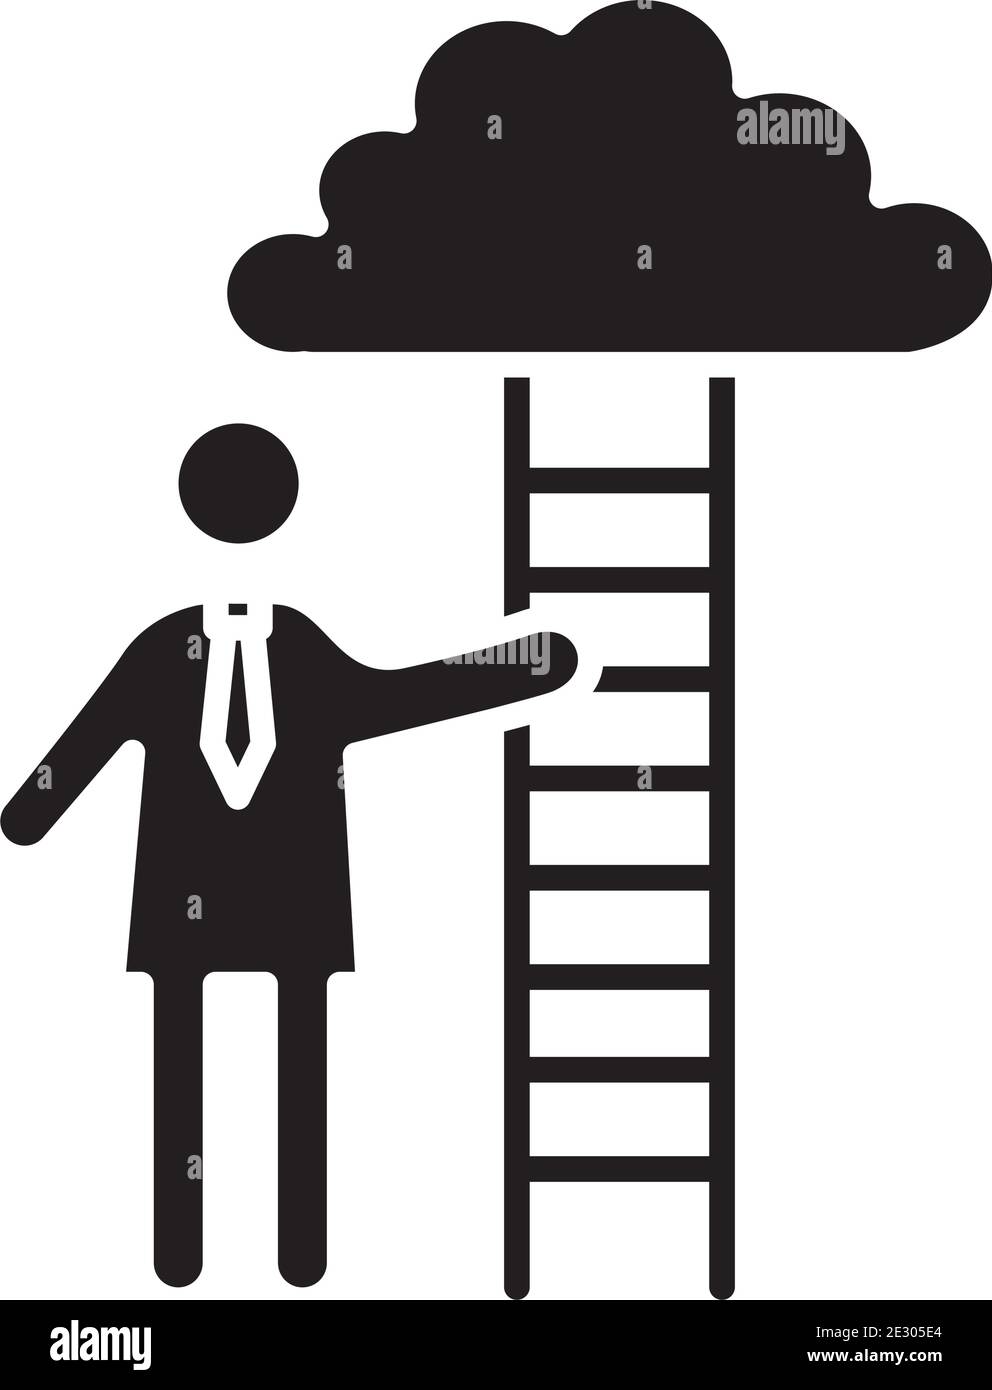 business person coaching with stairs and clouds silhouettes style icon Stock Vector